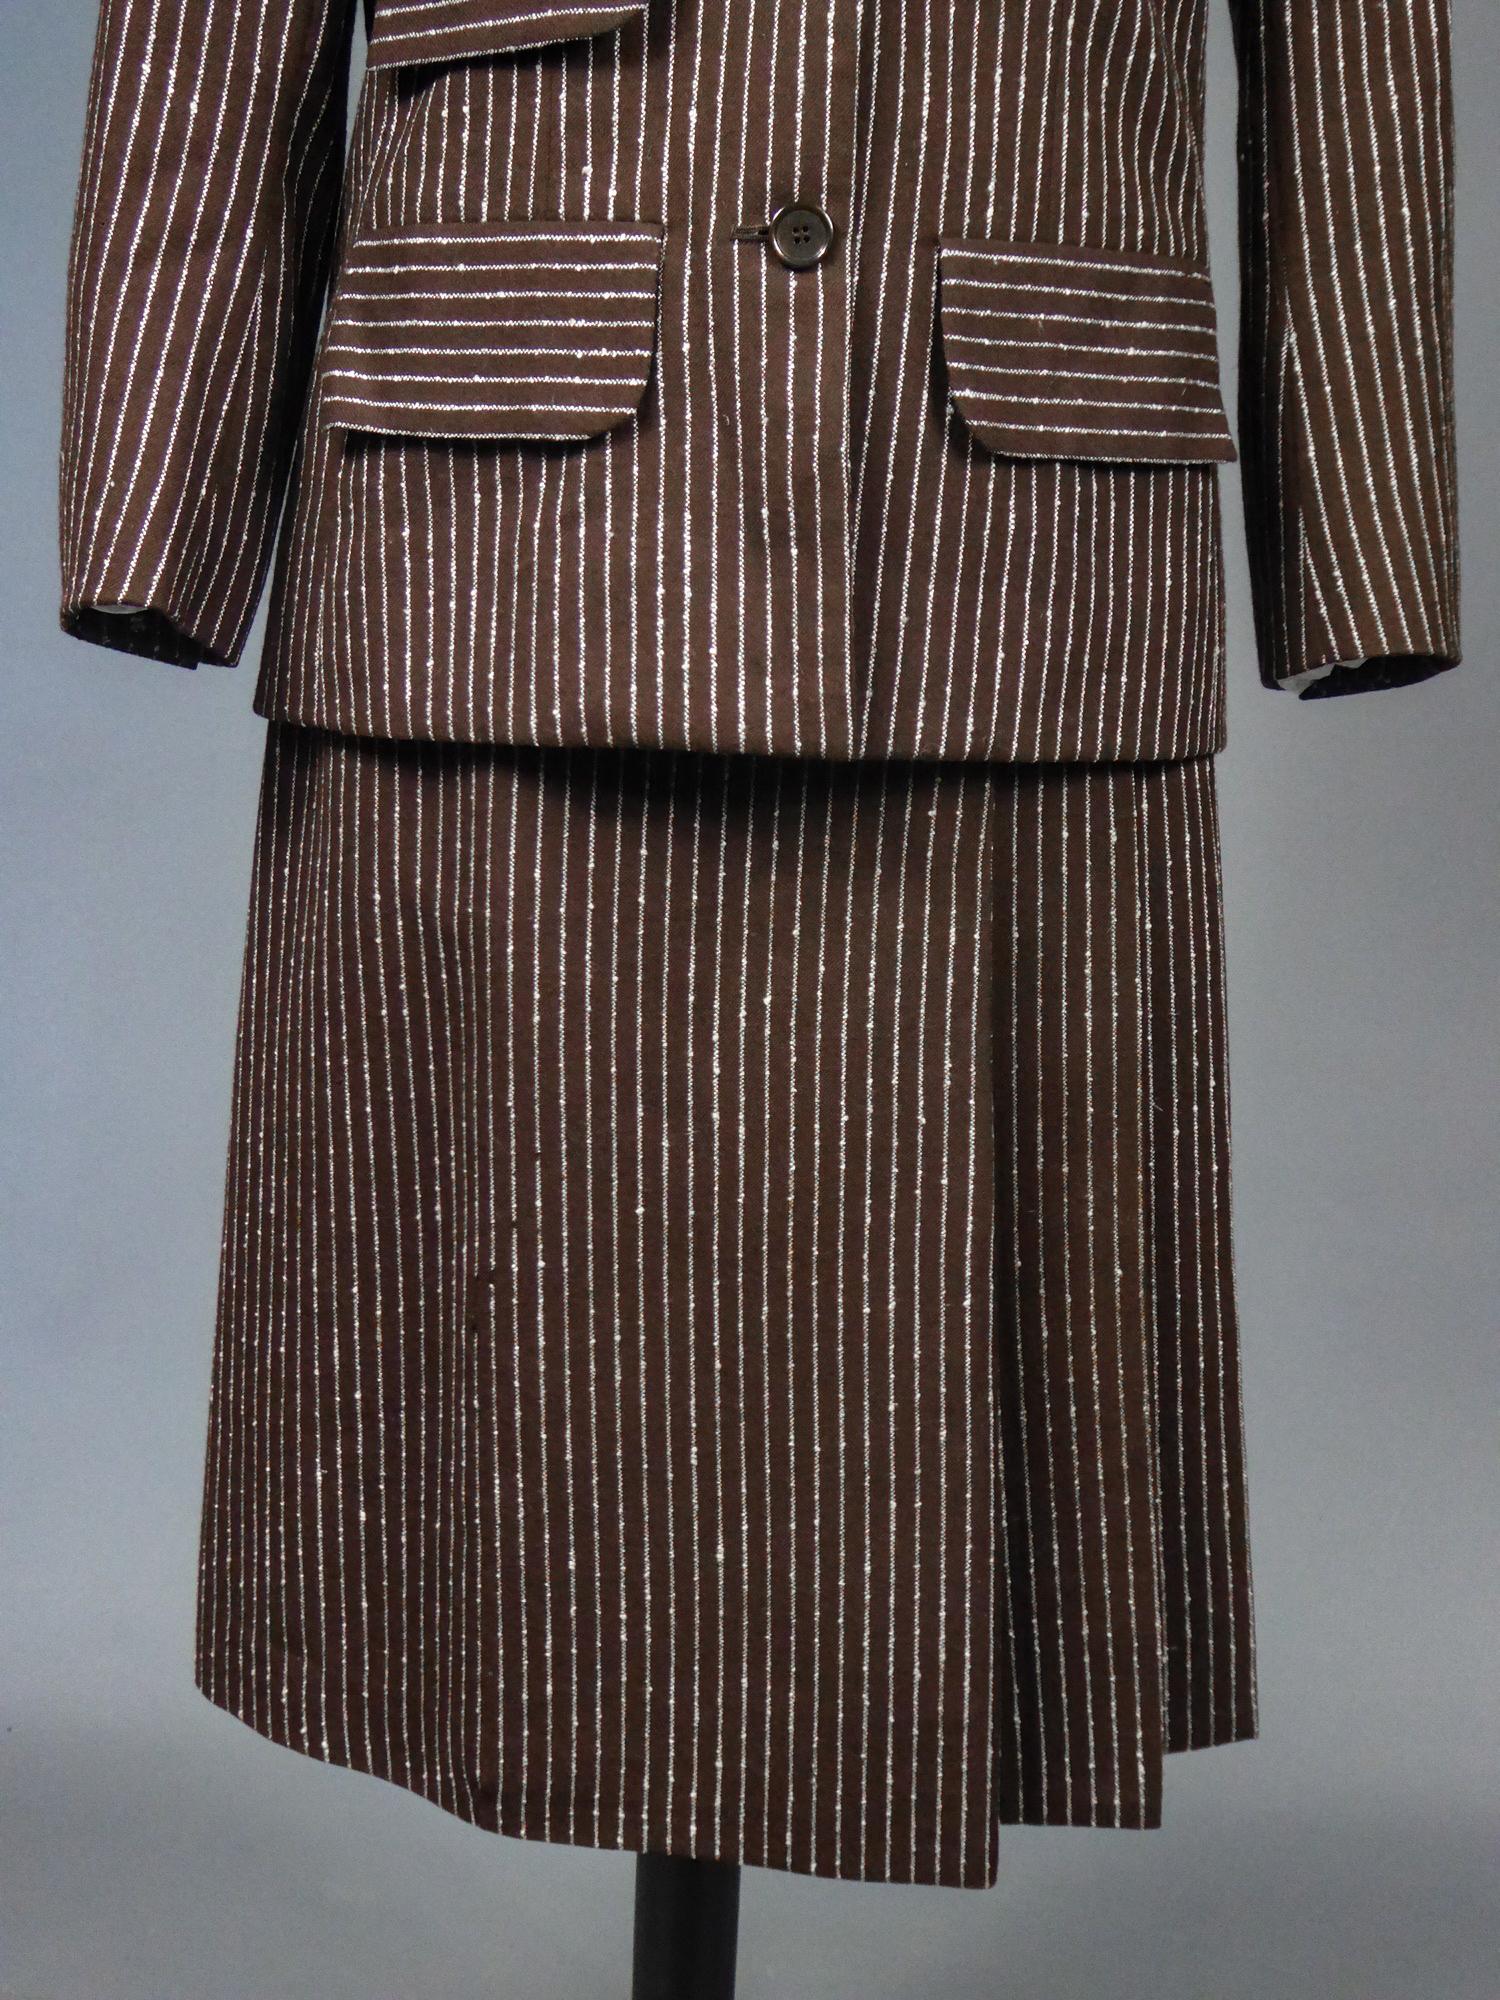 Yves Saint Laurent Haute Couture skirt-suit numbered 14539 Circa 1967/1970 For Sale 1